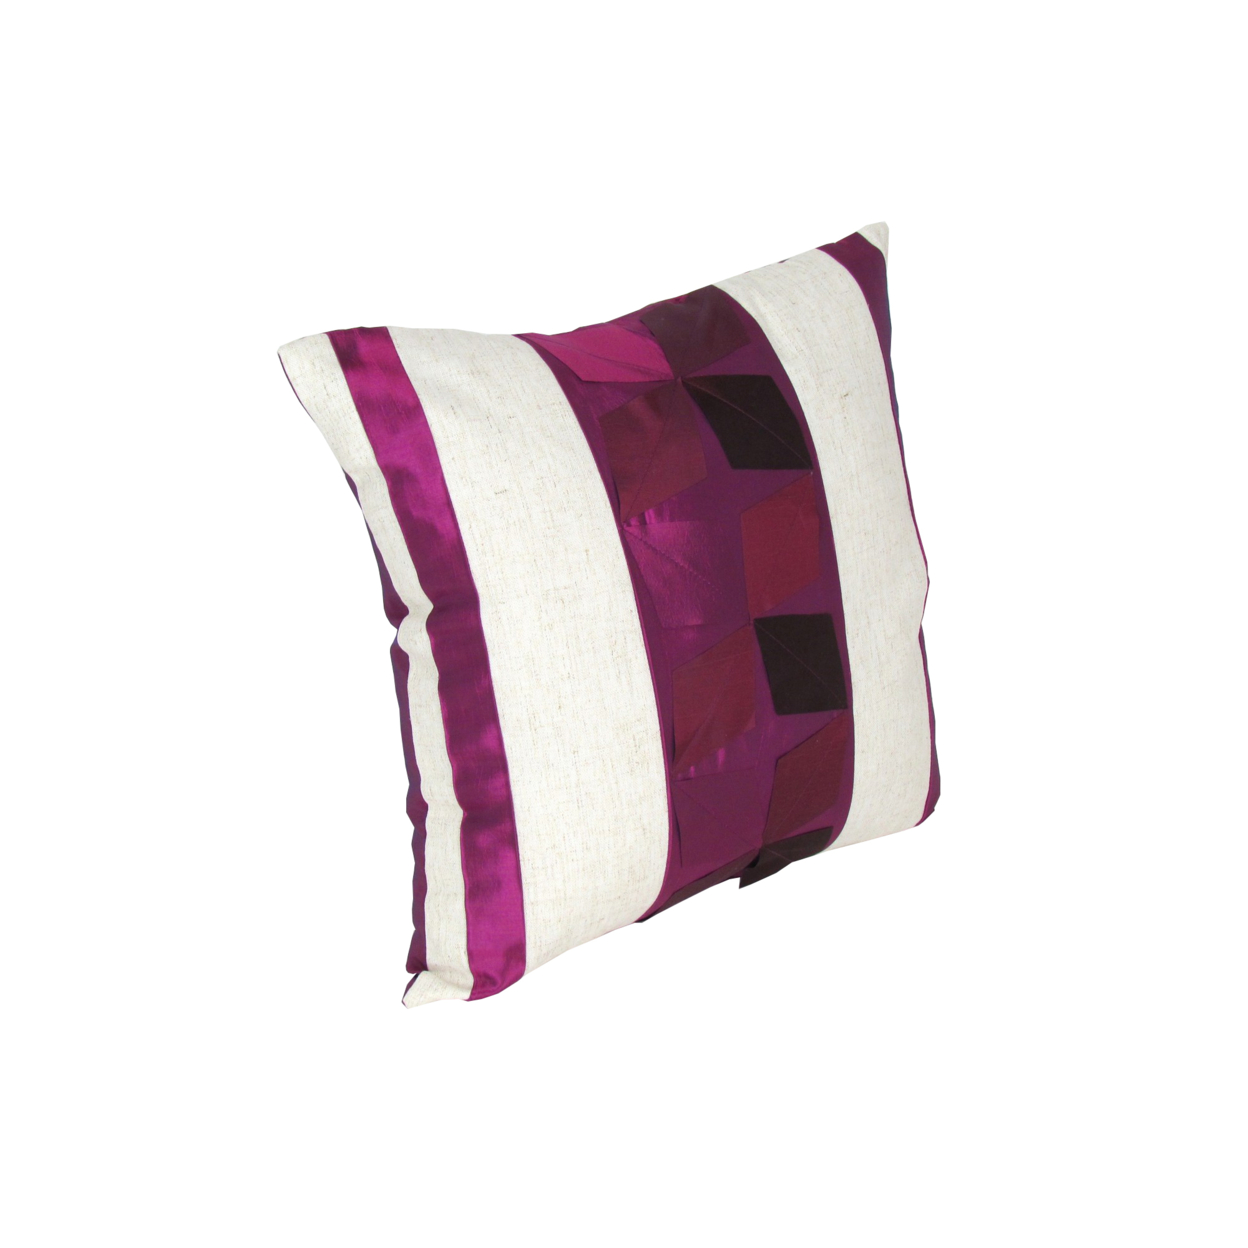 Floral Patchwork Fabric Accent Pillow, White And Purple- Saltoro Sherpi